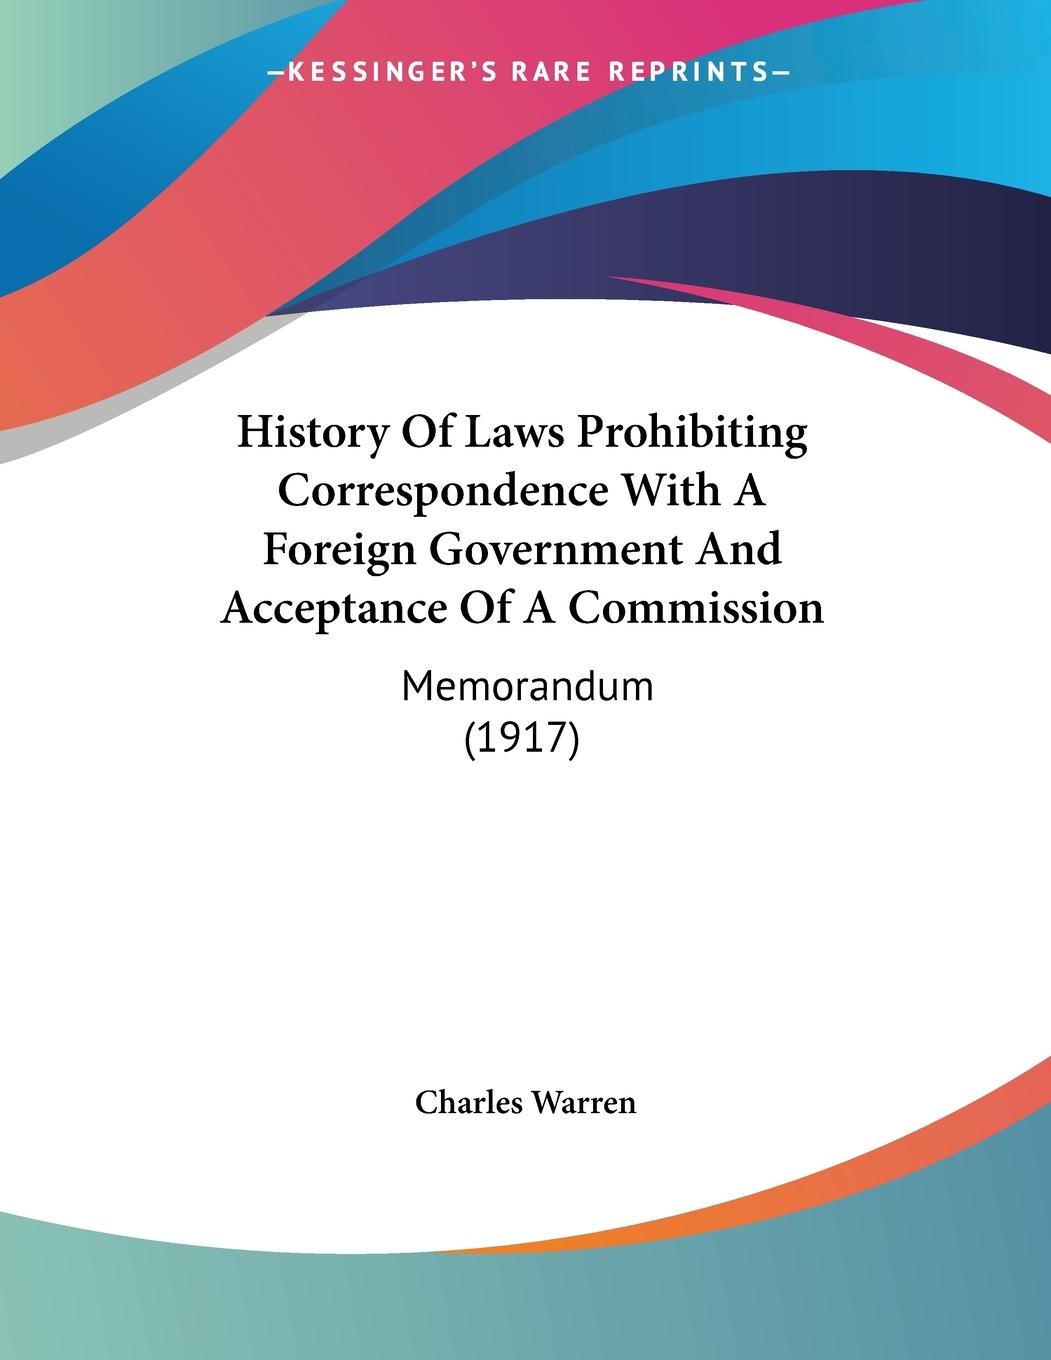 History Of Laws Prohibiting Correspondence With A Foreign Government And Acceptance Of A Commission - Warren, Charles